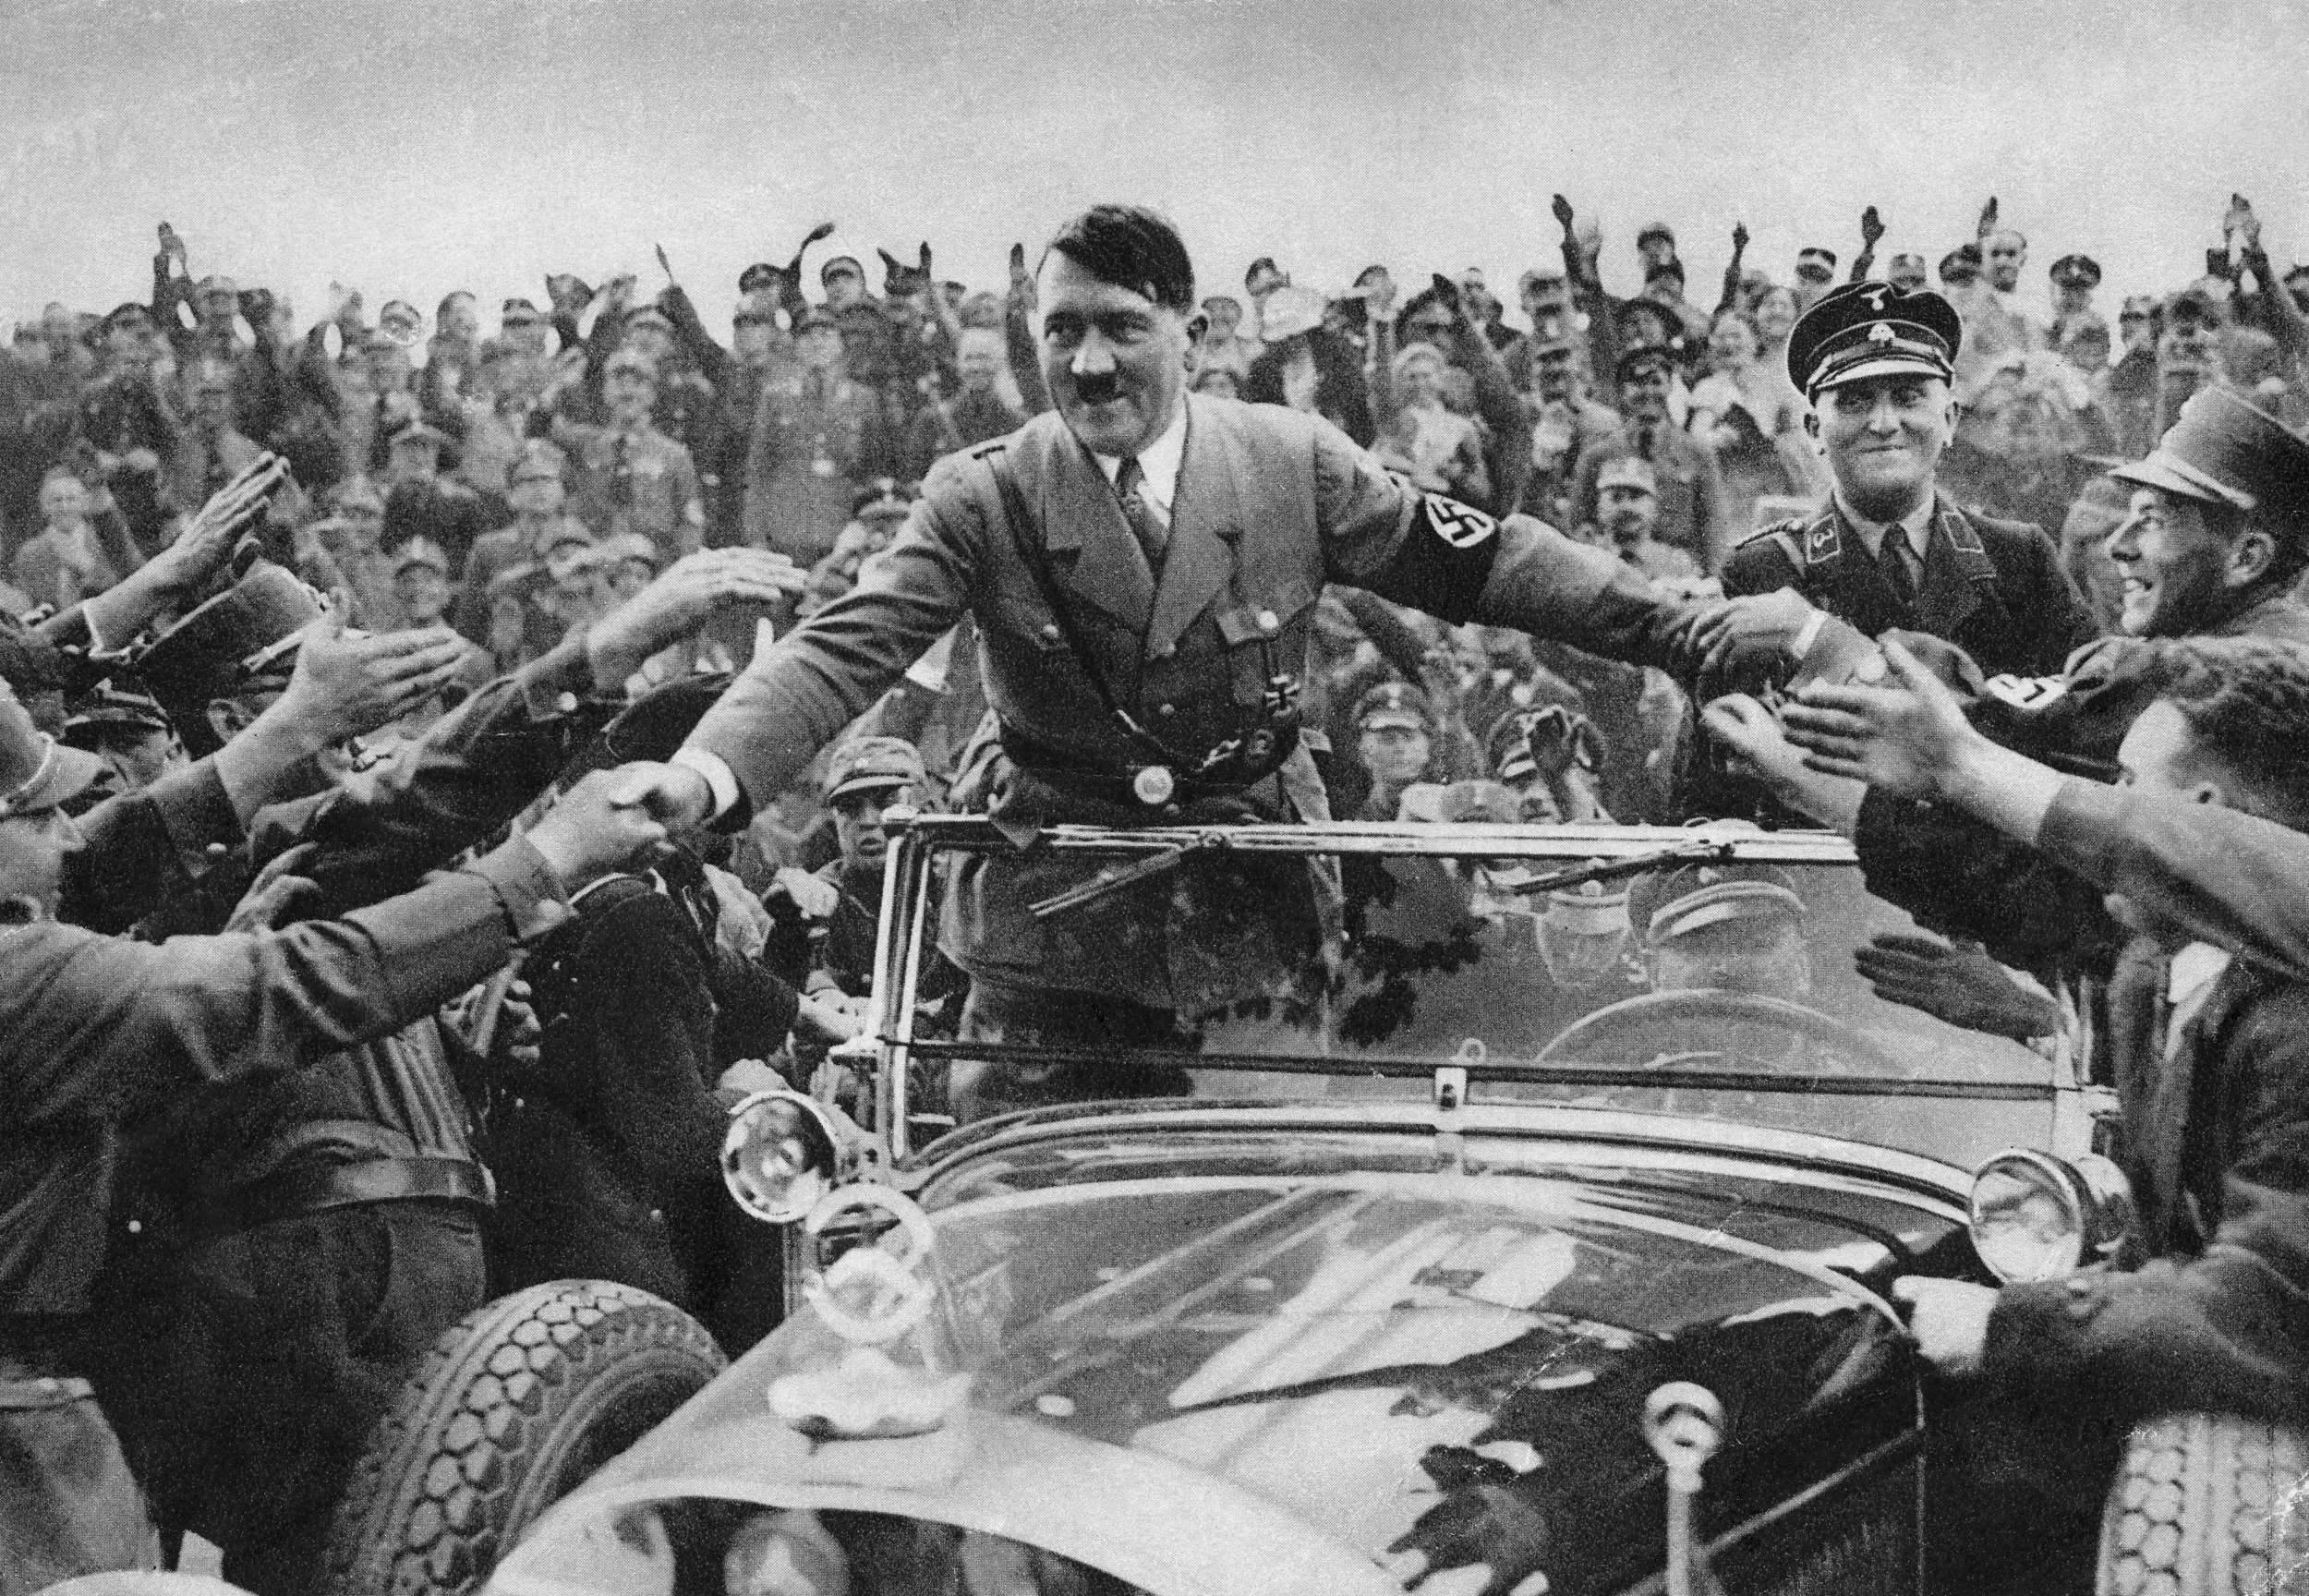 Hitler in a car rallying people towards his vision of the world back in Nazi Germany, proof of his charismatic leadership